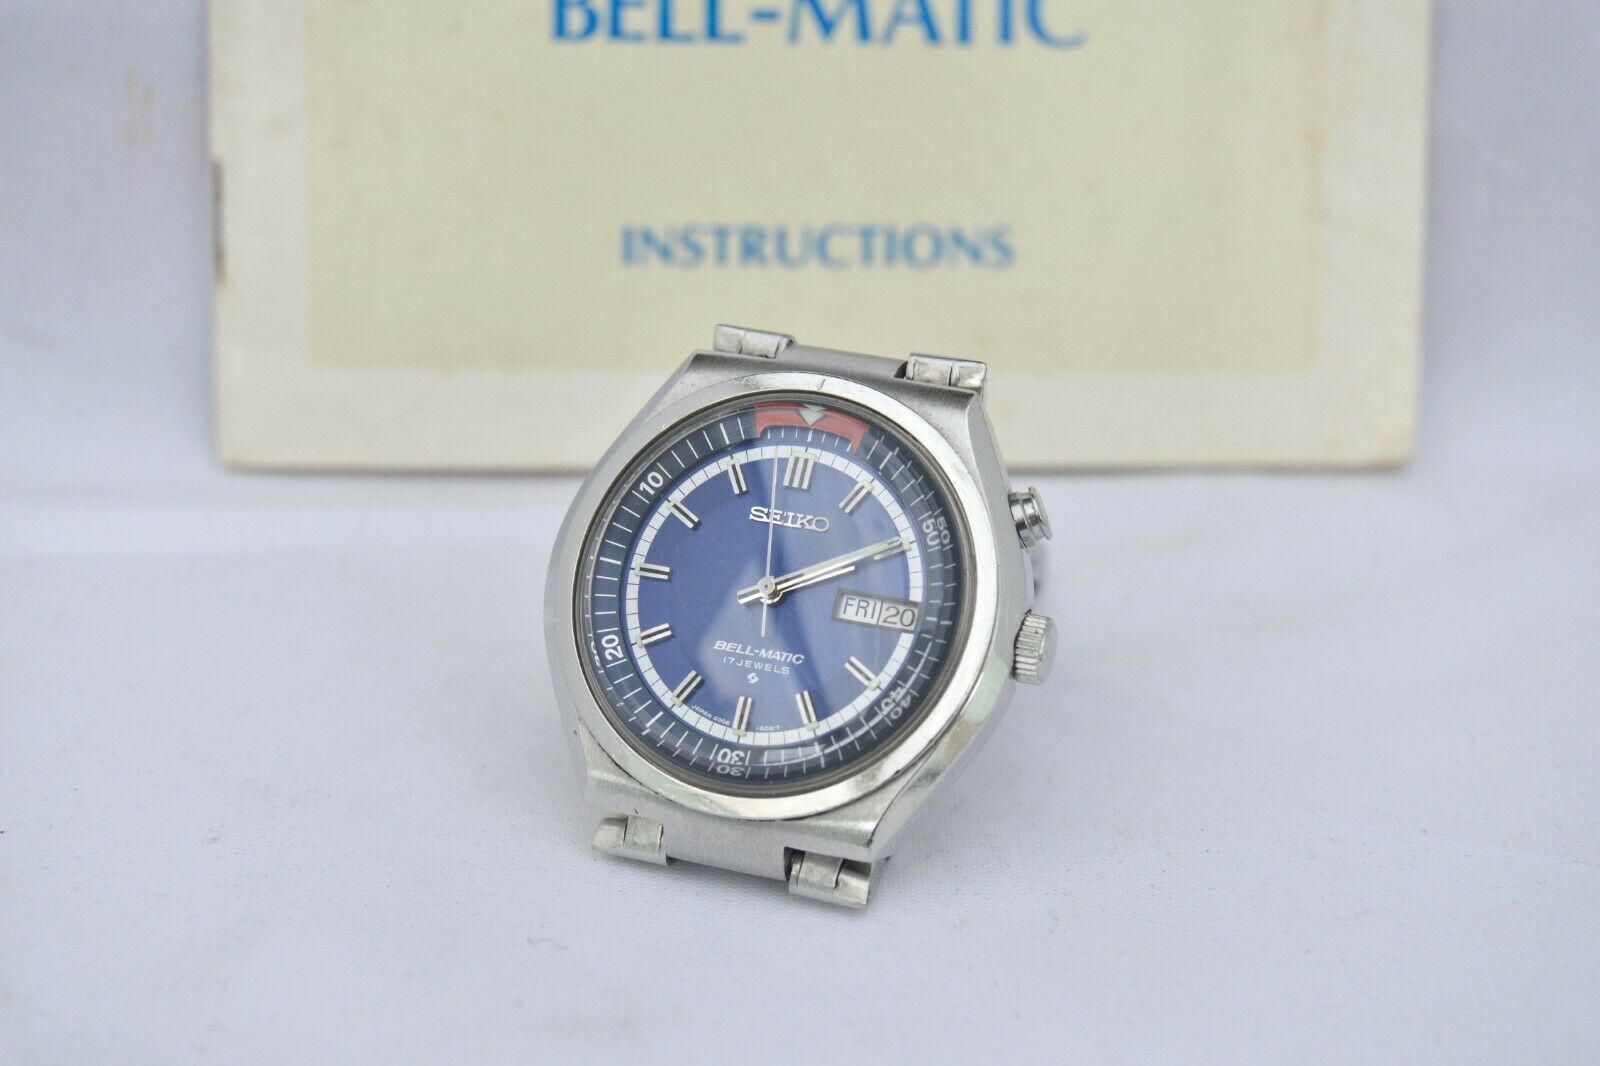 Vintage SEIKO Bellmatic 4060-6040 Blue Dial 1970s Working + instructions |  WatchCharts